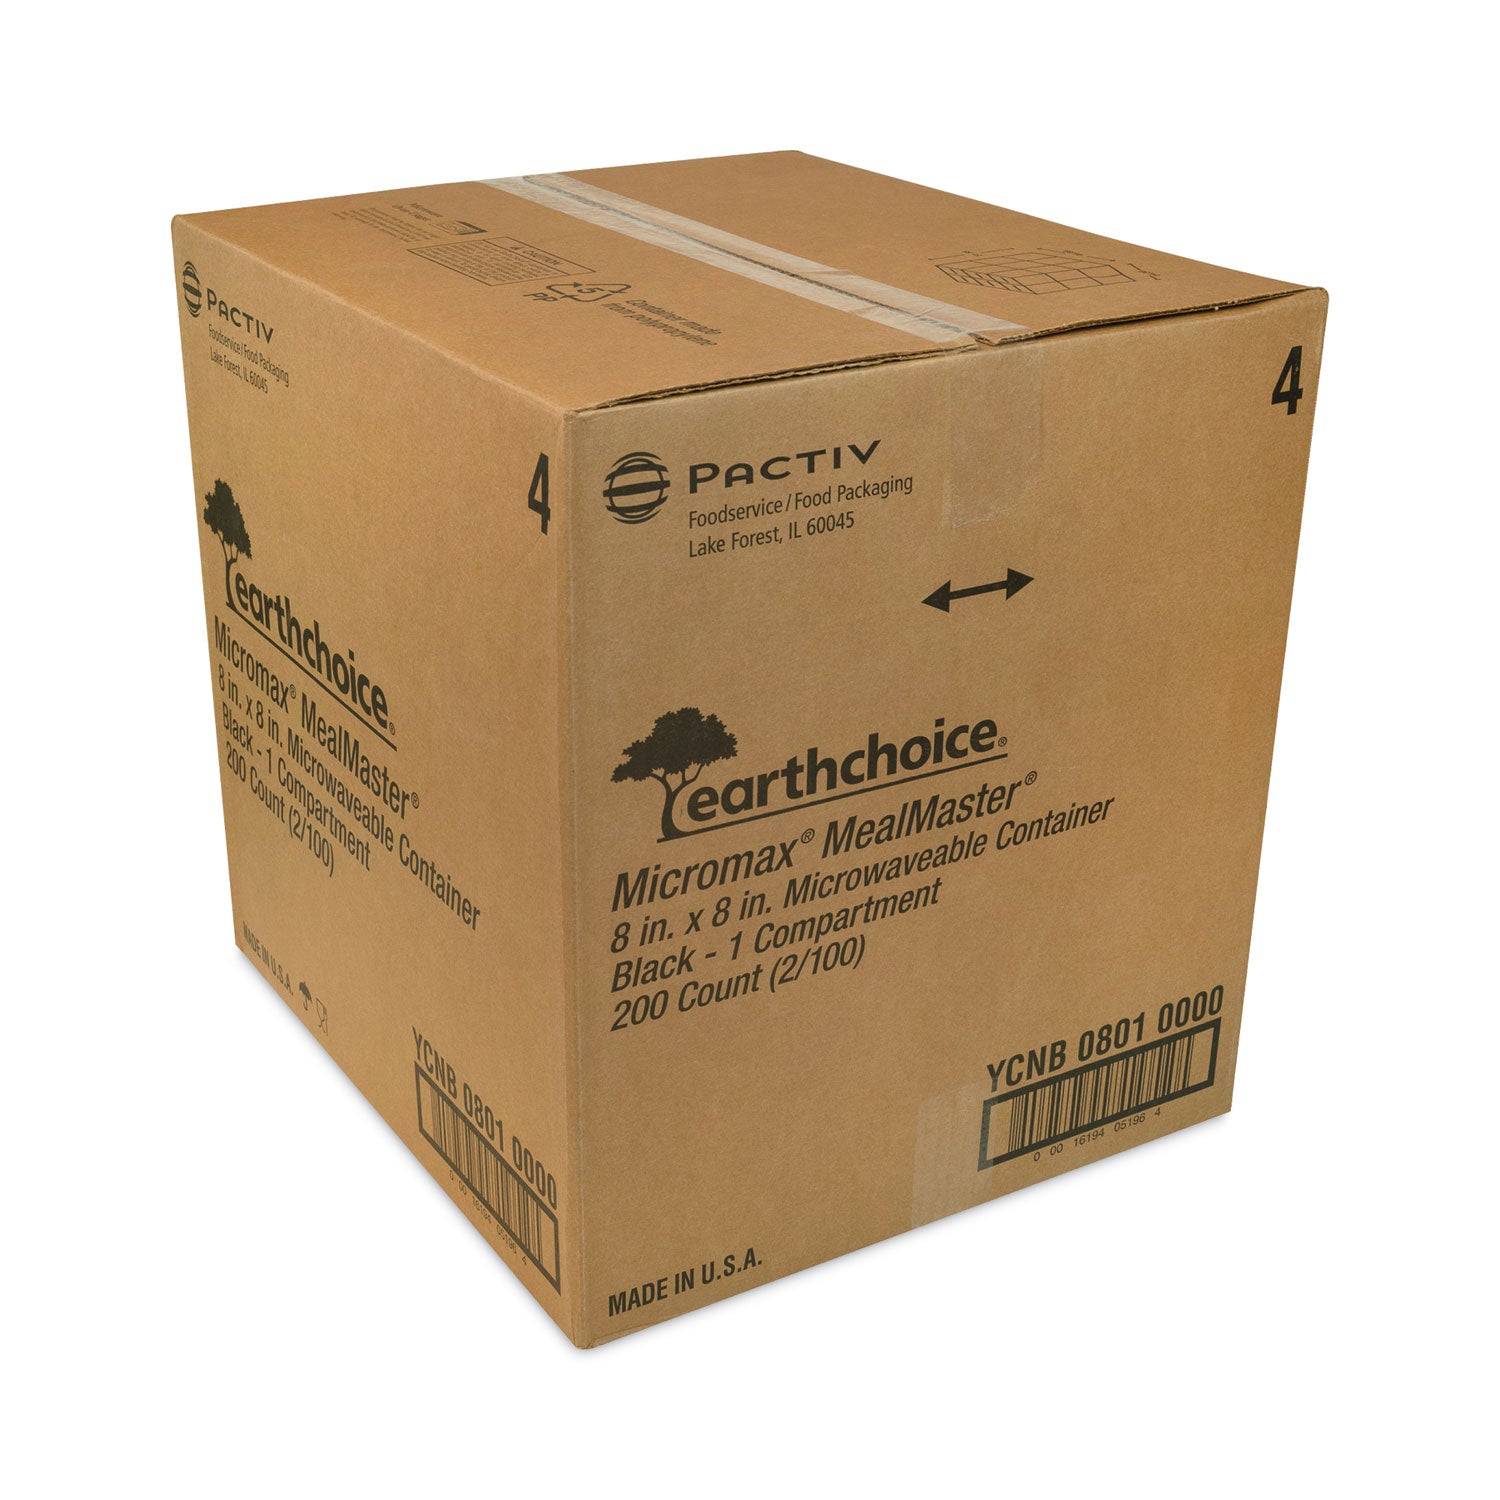 earthchoice-smartlock-microwavable-mfpp-hinged-lid-container-831-x-835-x-31-black-plastic-200-carton_pctycnb08010000 - 3